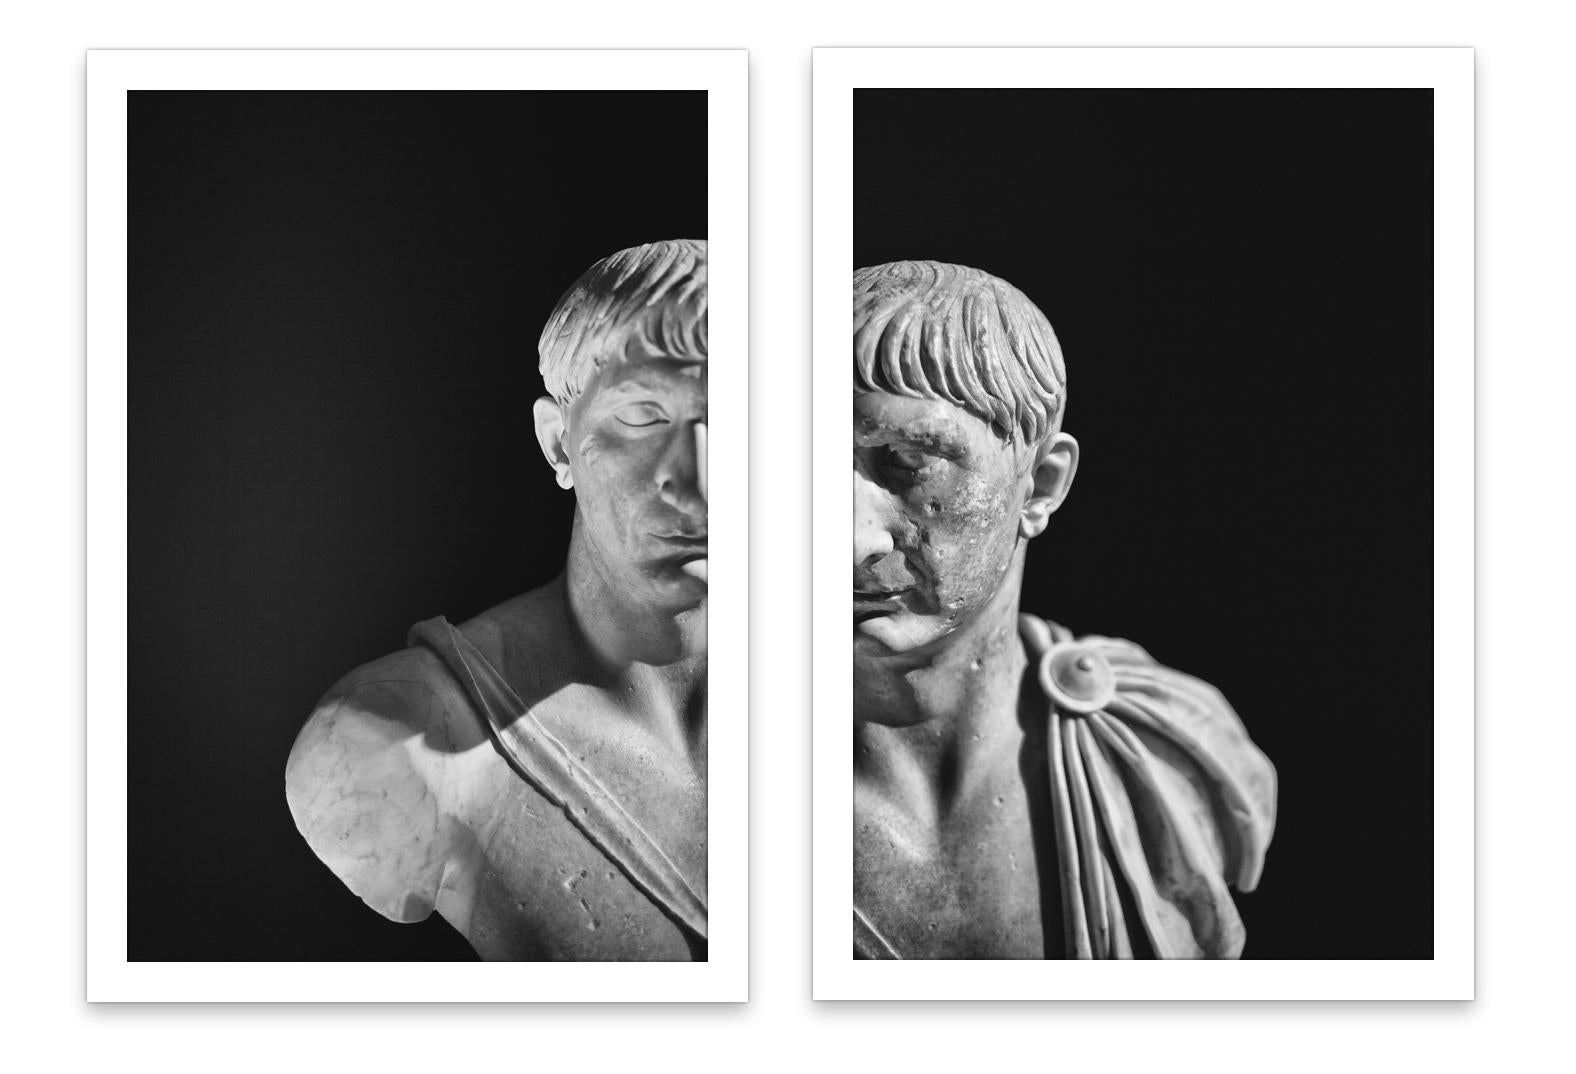 IMPERATORUM - diptychs Traiano & Traiano #01 #02 - collection: "Romae" - Alberto Desirò

Emperor Trajan of Rome.
Dimensions: 45x30 cm.
Year: Rome 2018
Technique: Digital Art Giclée
Support: Cotton paper PhotoRag Hahnemuehle
Assembly: no